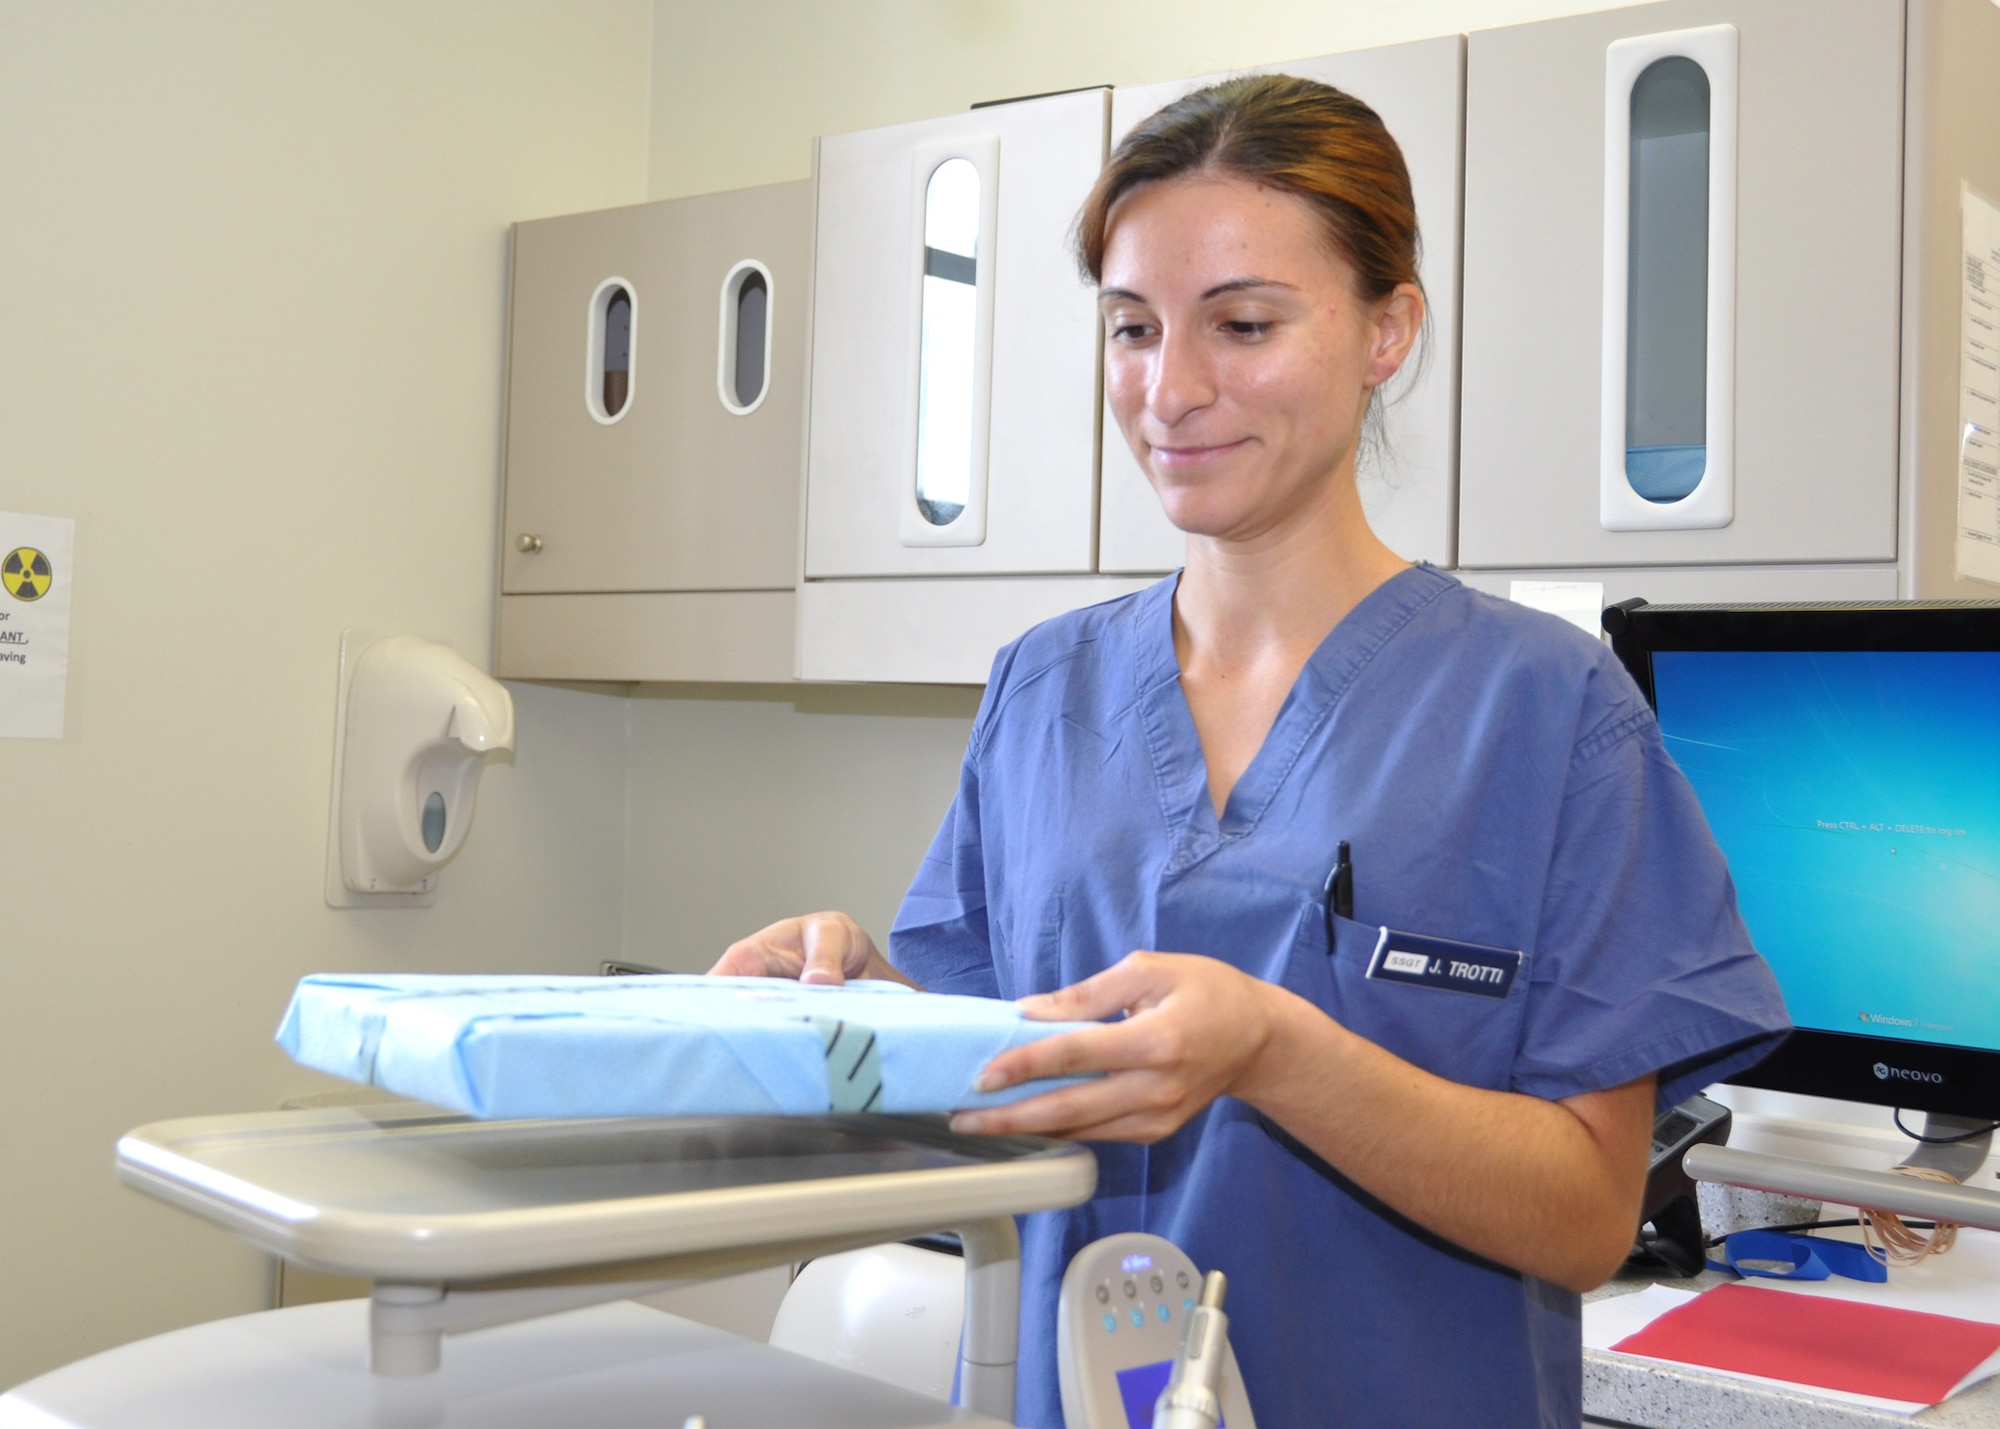 Staff Sgt. Joana Trotti, 81st Dental Squadron, places a sterilized instrument kit on a tray in a dental treatment room June 17, 2012, at Keesler Air Force Base, Miss.  Trotti was selected into the nurse enlisted commissioning program June 13. (U.S. Air Force photo by Steve Pivnick)